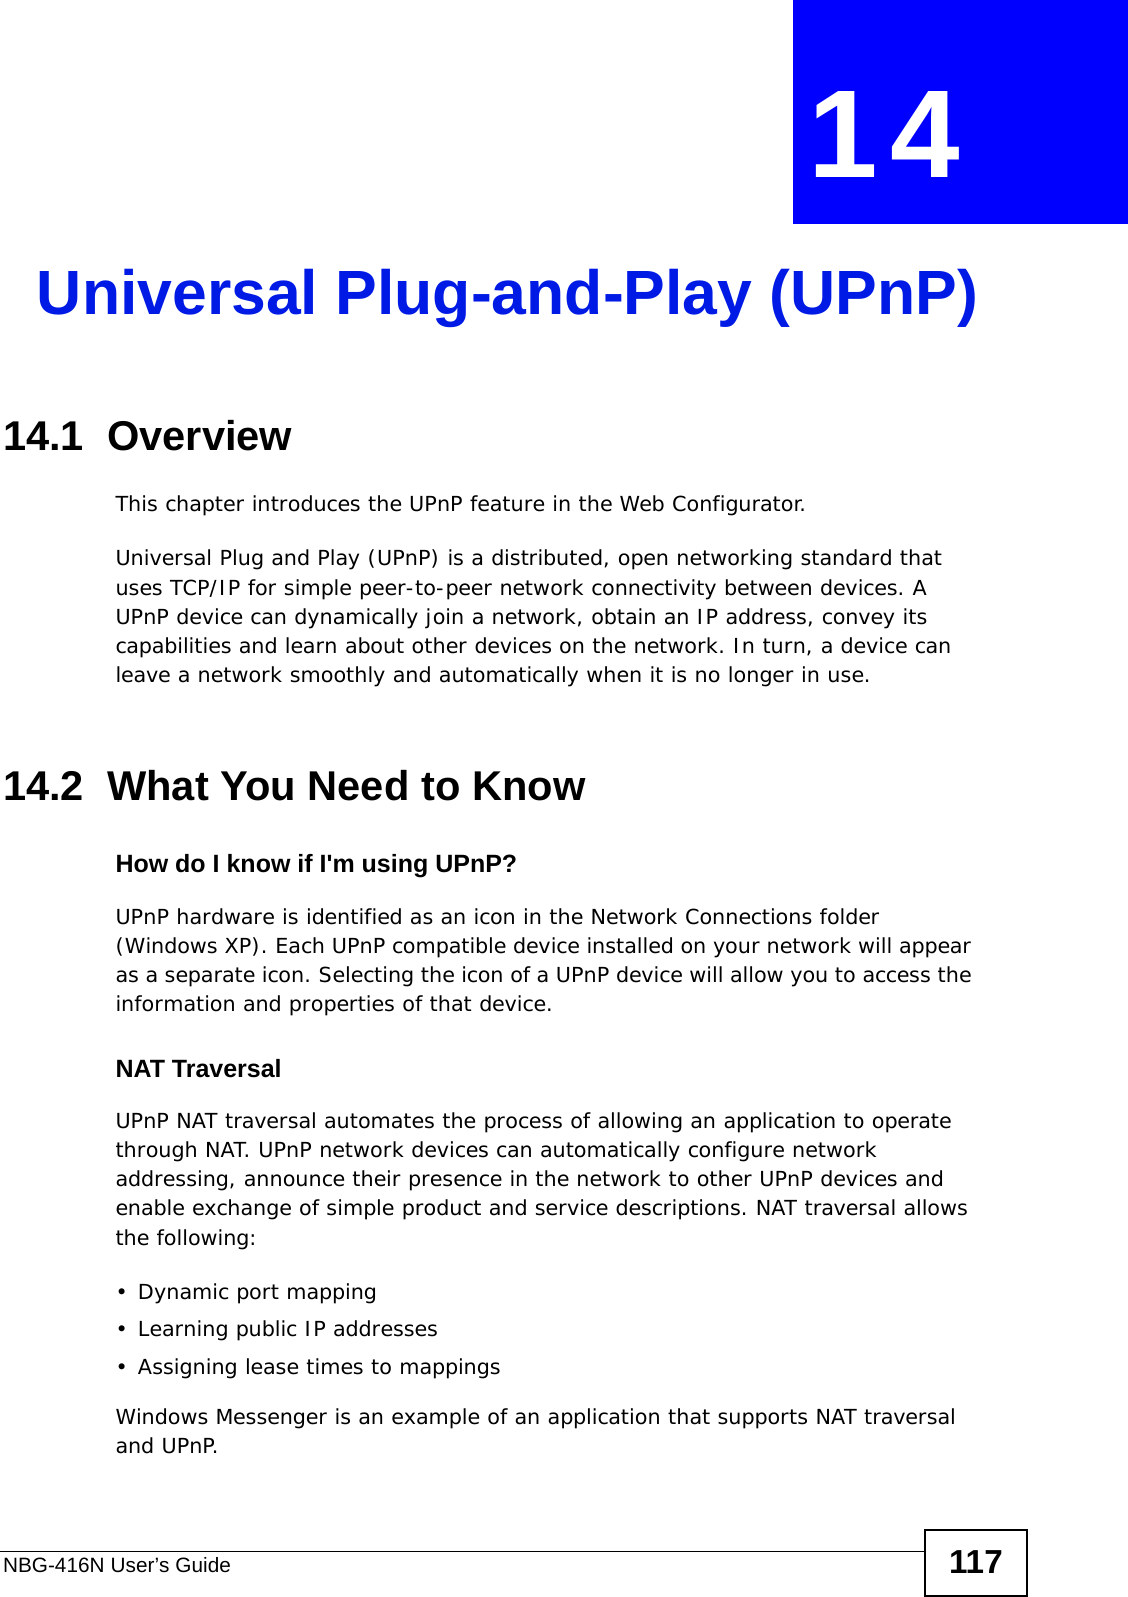 NBG-416N User’s Guide 117CHAPTER  14 Universal Plug-and-Play (UPnP)14.1  Overview This chapter introduces the UPnP feature in the Web Configurator.Universal Plug and Play (UPnP) is a distributed, open networking standard that uses TCP/IP for simple peer-to-peer network connectivity between devices. A UPnP device can dynamically join a network, obtain an IP address, convey its capabilities and learn about other devices on the network. In turn, a device can leave a network smoothly and automatically when it is no longer in use.14.2  What You Need to KnowHow do I know if I&apos;m using UPnP? UPnP hardware is identified as an icon in the Network Connections folder (Windows XP). Each UPnP compatible device installed on your network will appear as a separate icon. Selecting the icon of a UPnP device will allow you to access the information and properties of that device. NAT TraversalUPnP NAT traversal automates the process of allowing an application to operate through NAT. UPnP network devices can automatically configure network addressing, announce their presence in the network to other UPnP devices and enable exchange of simple product and service descriptions. NAT traversal allows the following:• Dynamic port mapping• Learning public IP addresses• Assigning lease times to mappingsWindows Messenger is an example of an application that supports NAT traversal and UPnP. 